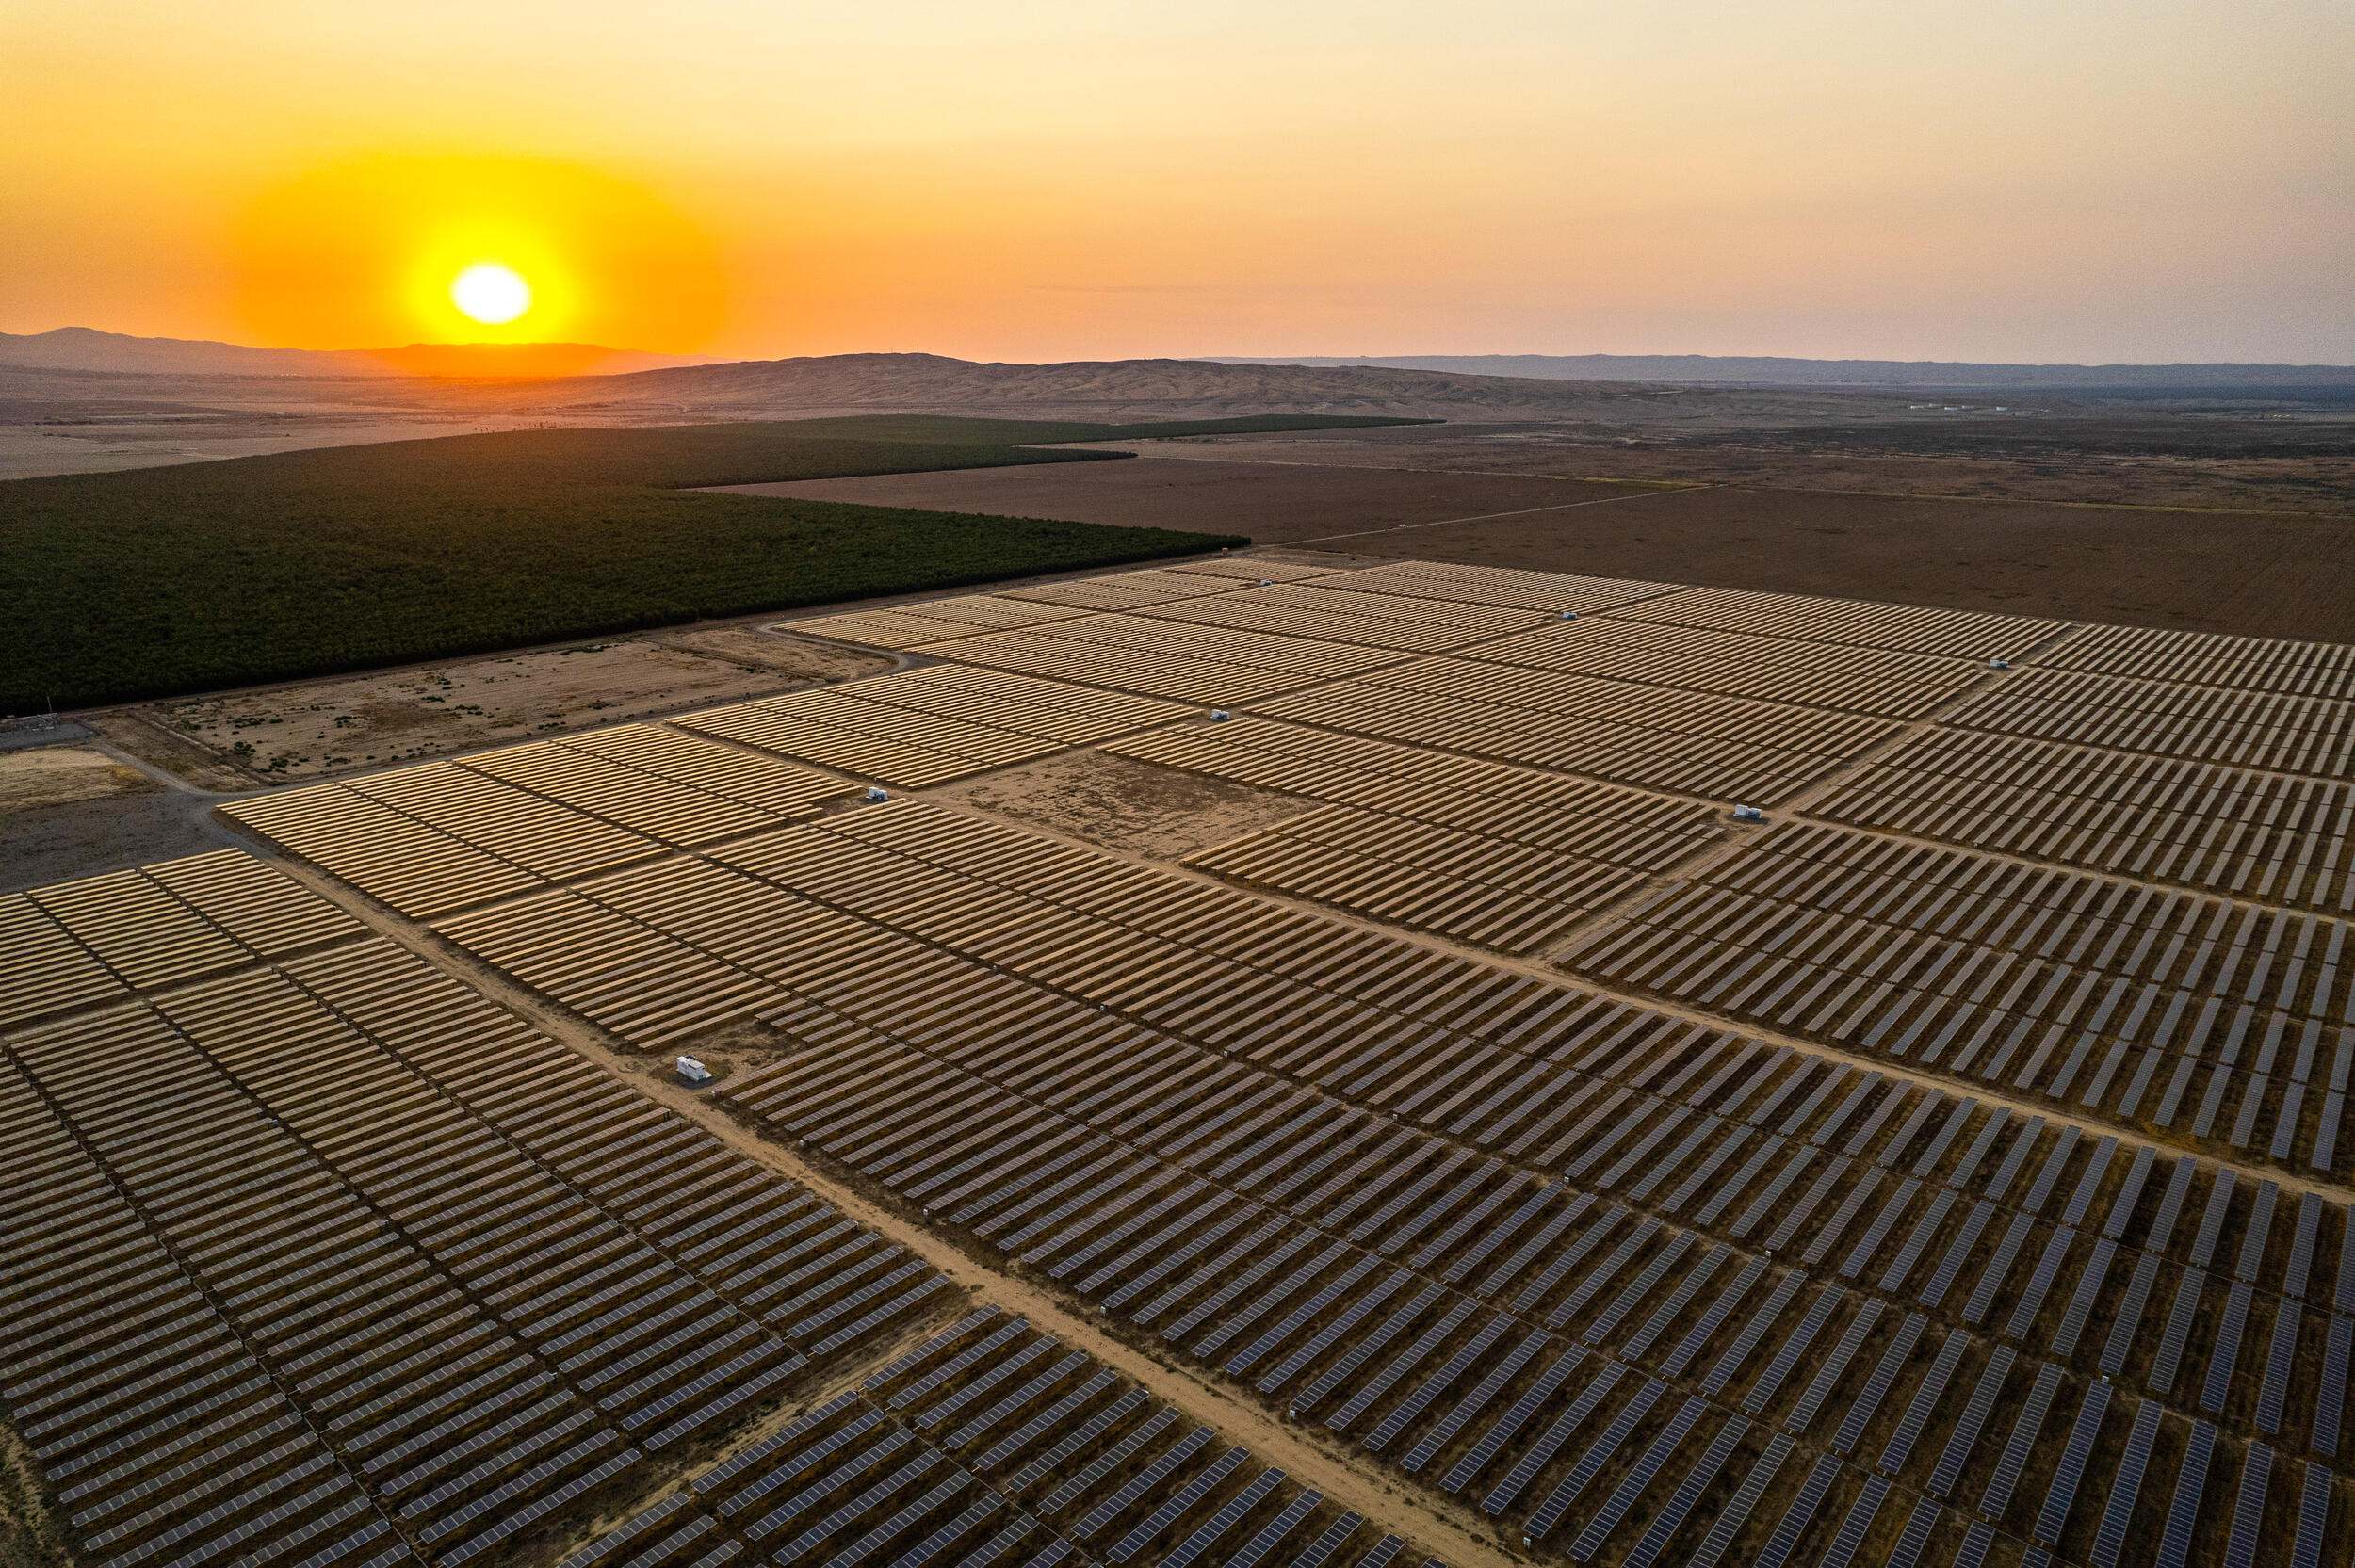 An aerial image of a field covered in solar panels and a sunset.